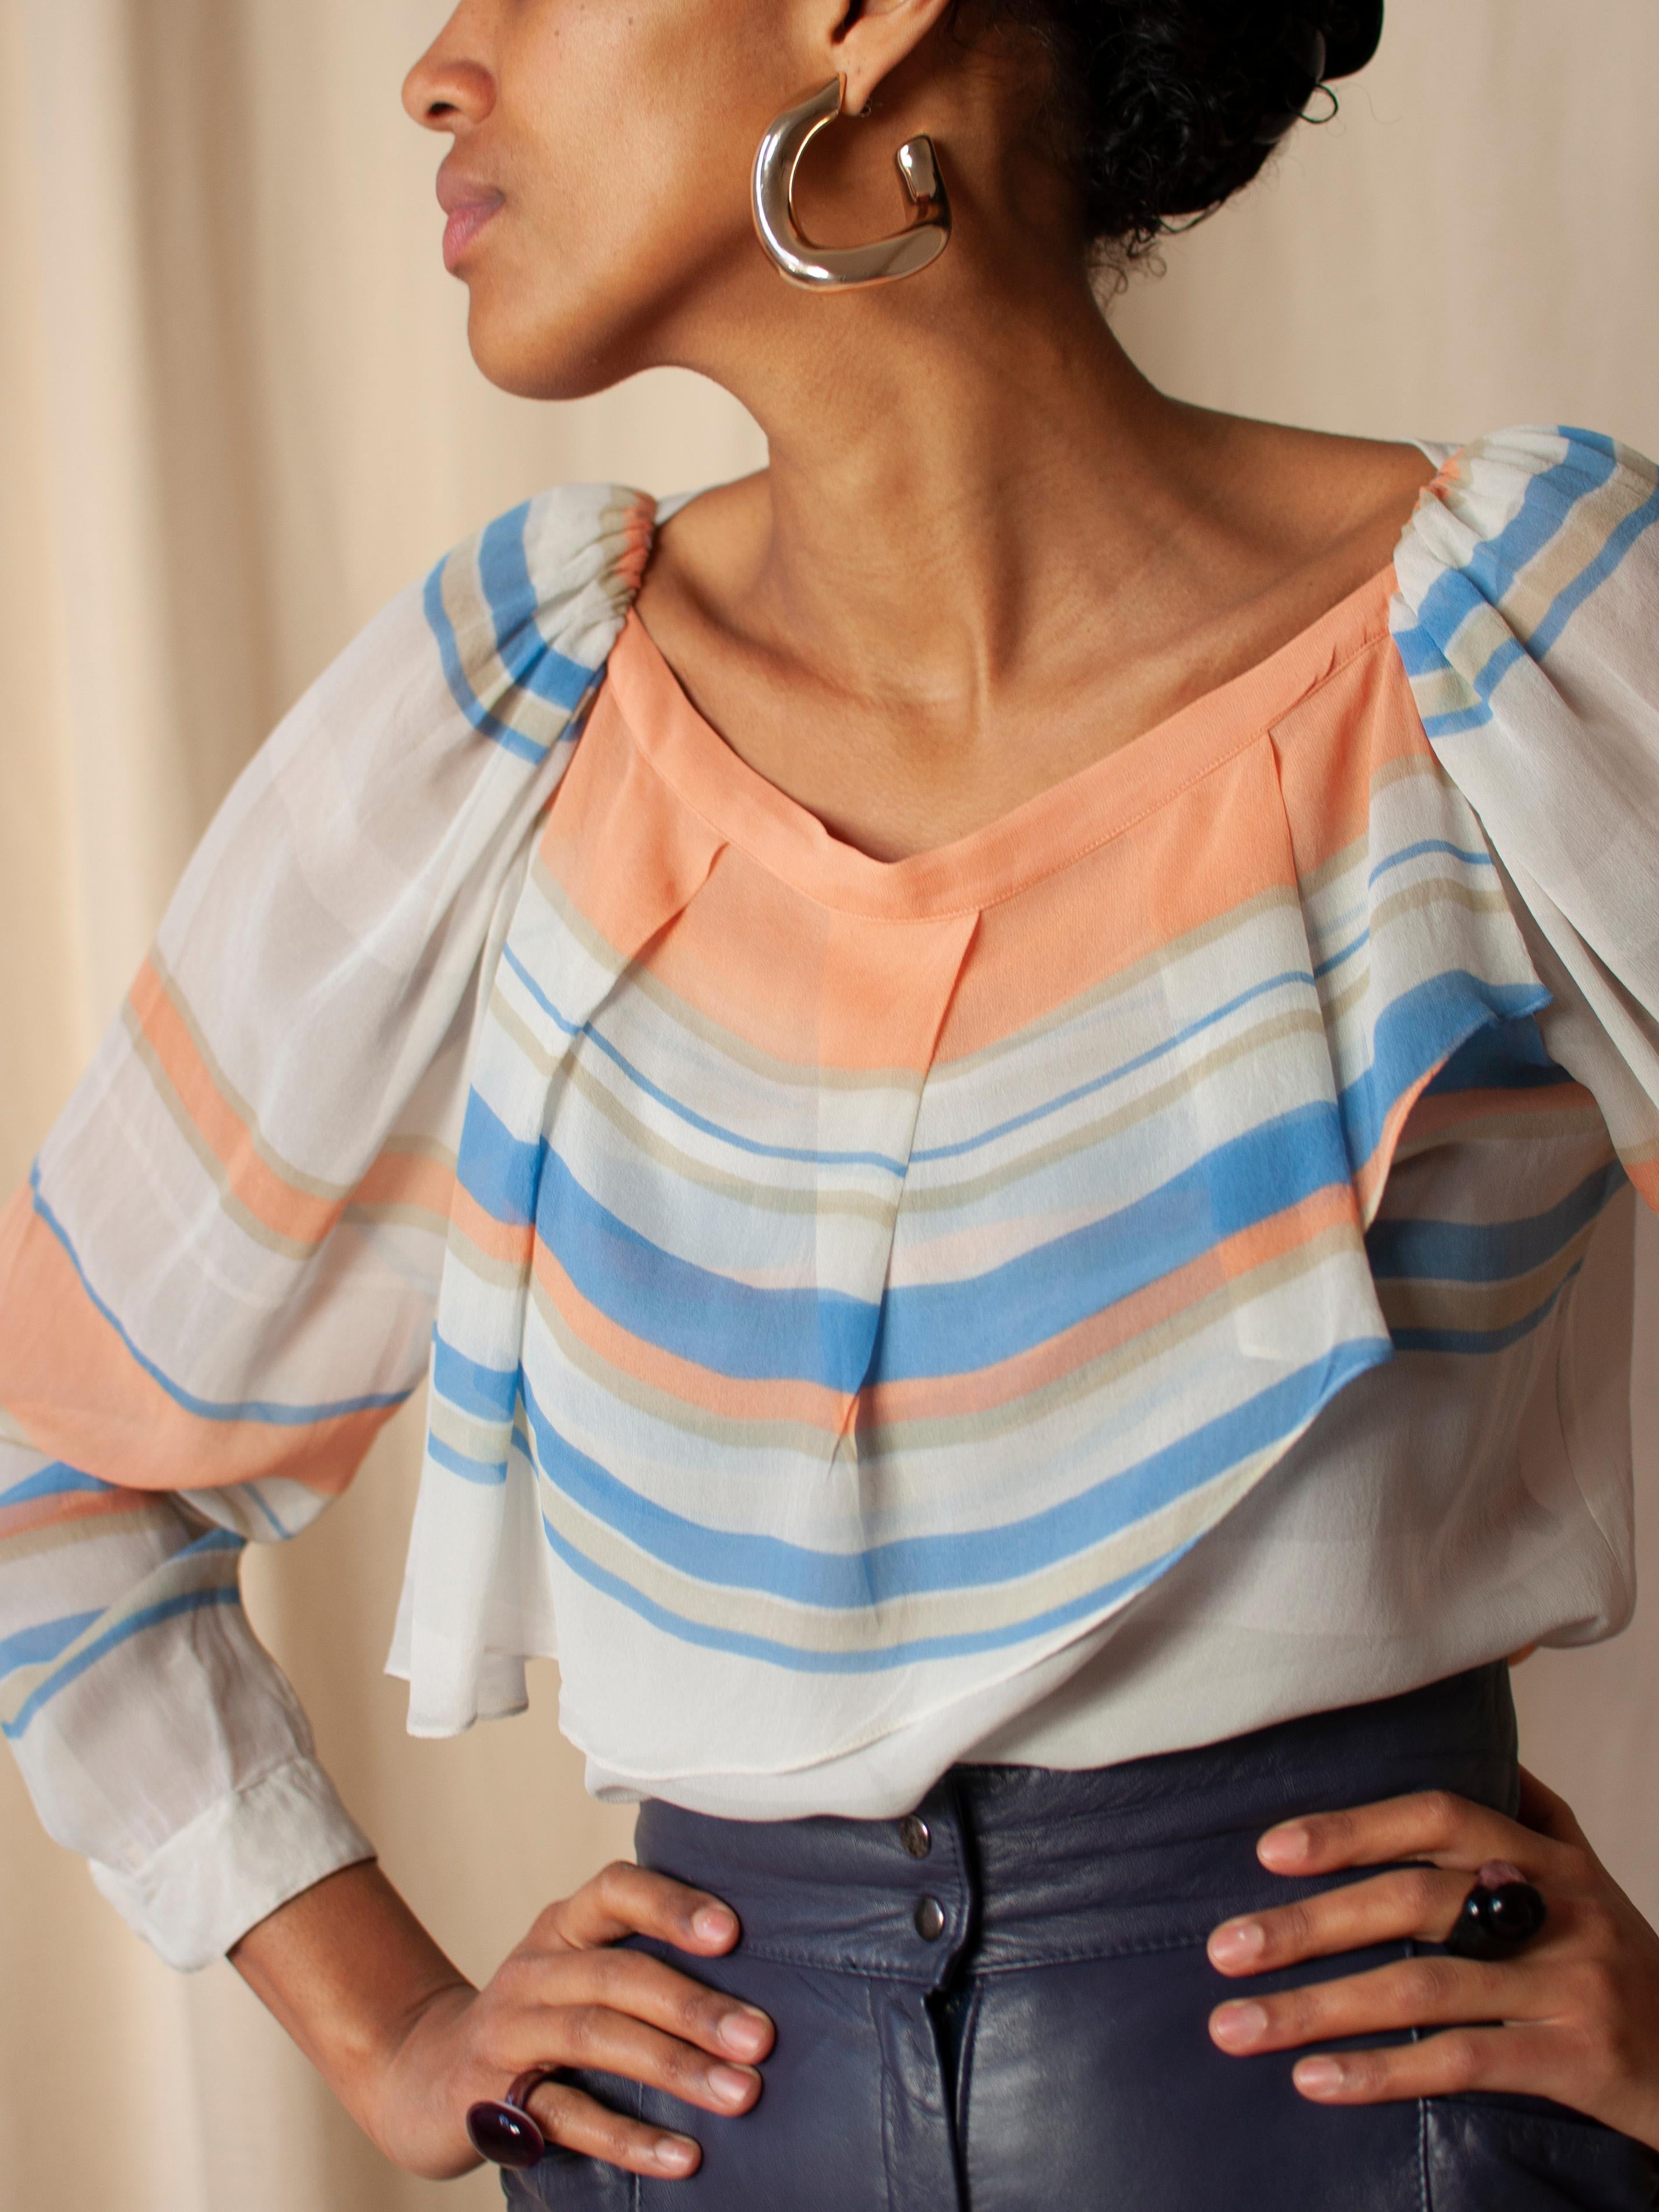 Women's Christian Dior Silk Striped Blouse with Volant Detail by Marc Bohan 1970s For Sale